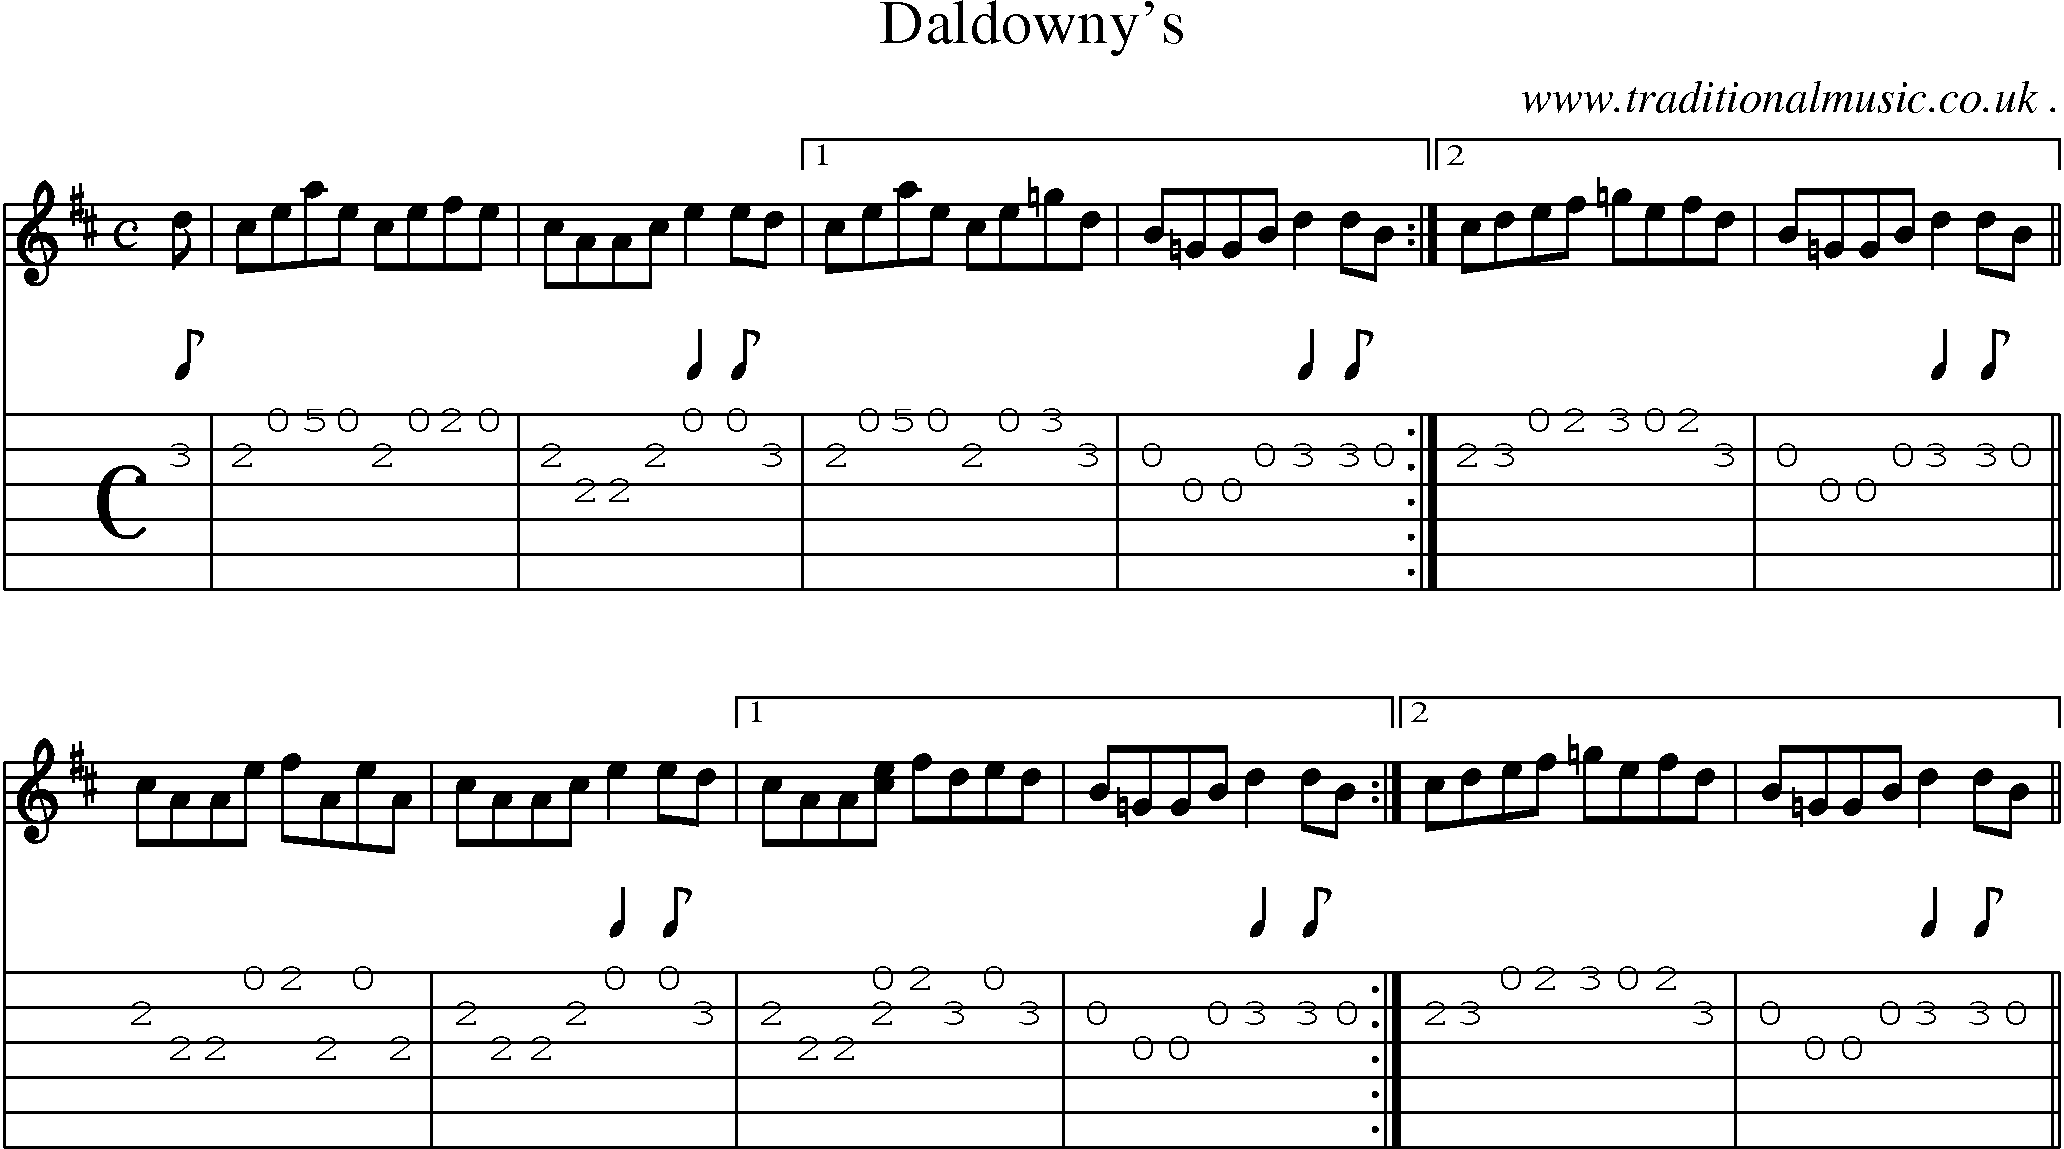 Sheet-music  score, Chords and Guitar Tabs for Daldownys1